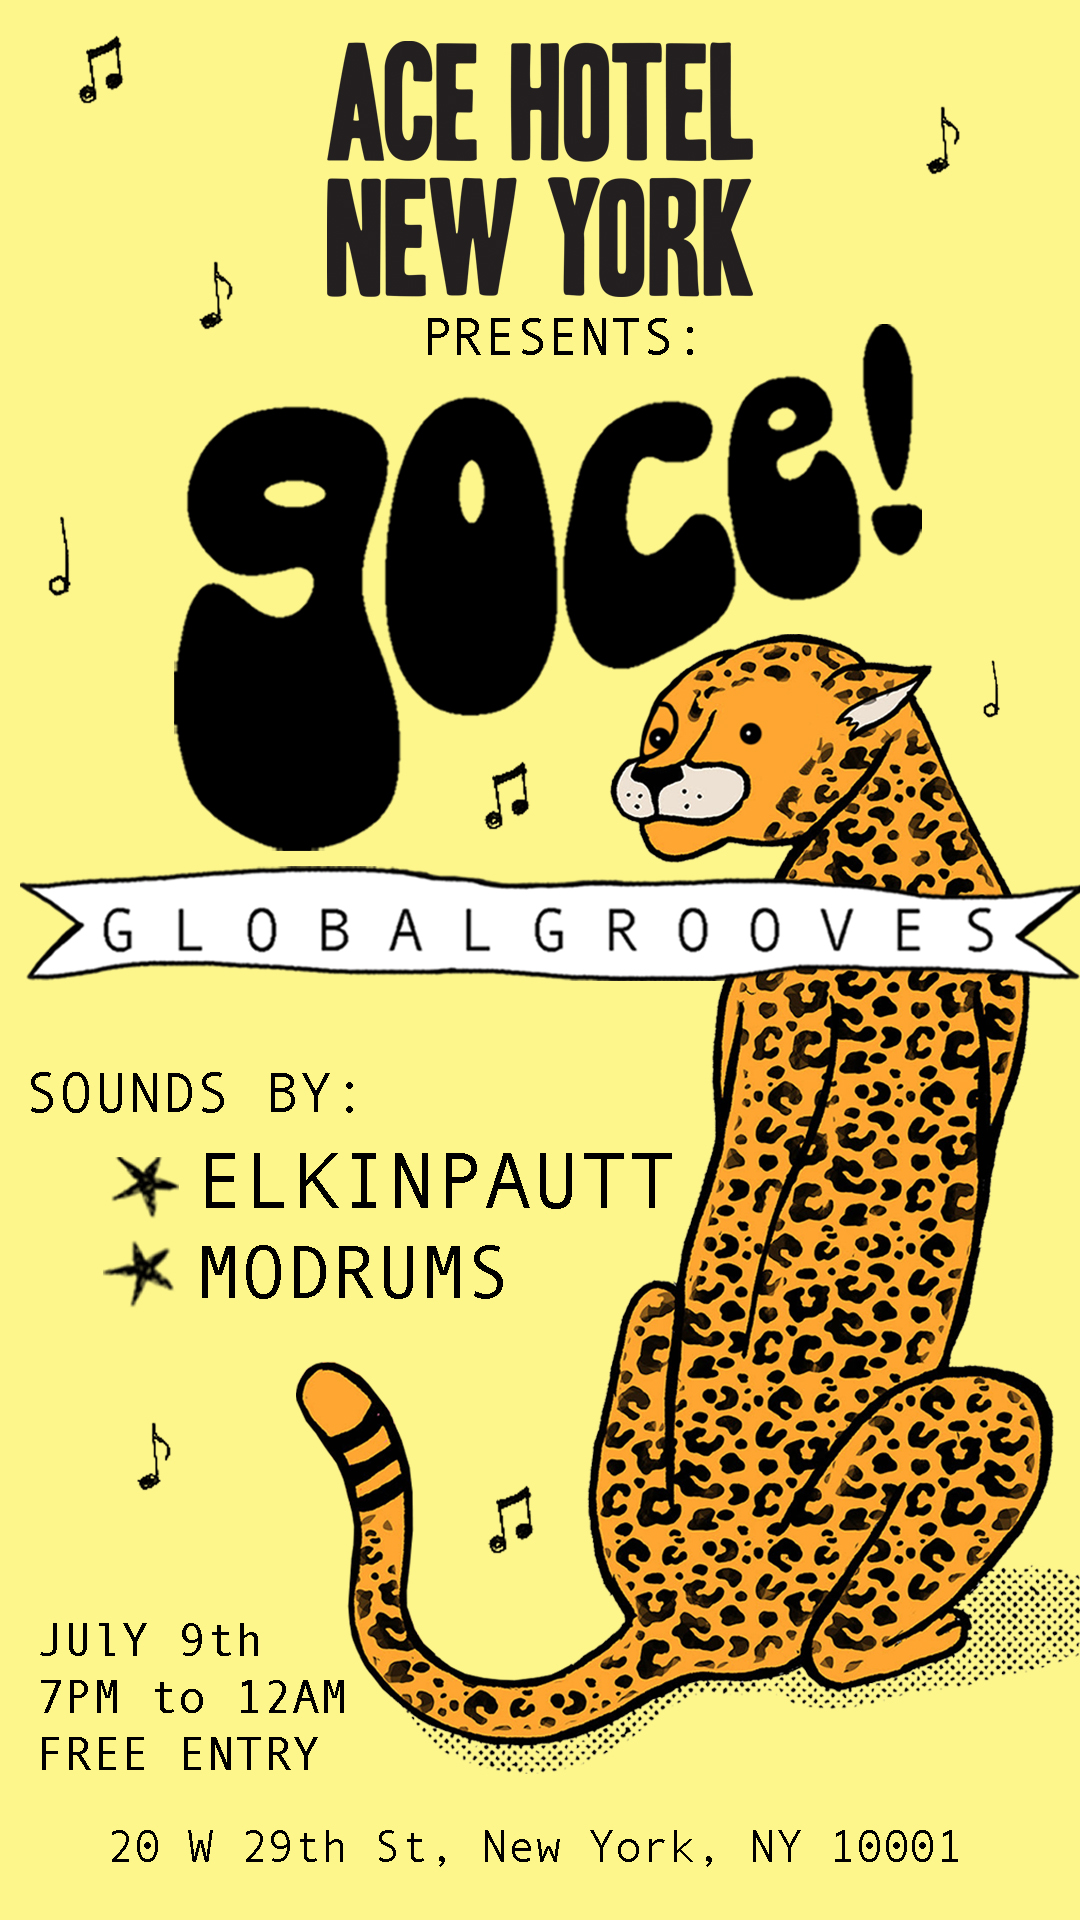 Ace Hotel New York presents: GOCE! Global Grooves promo - July 9